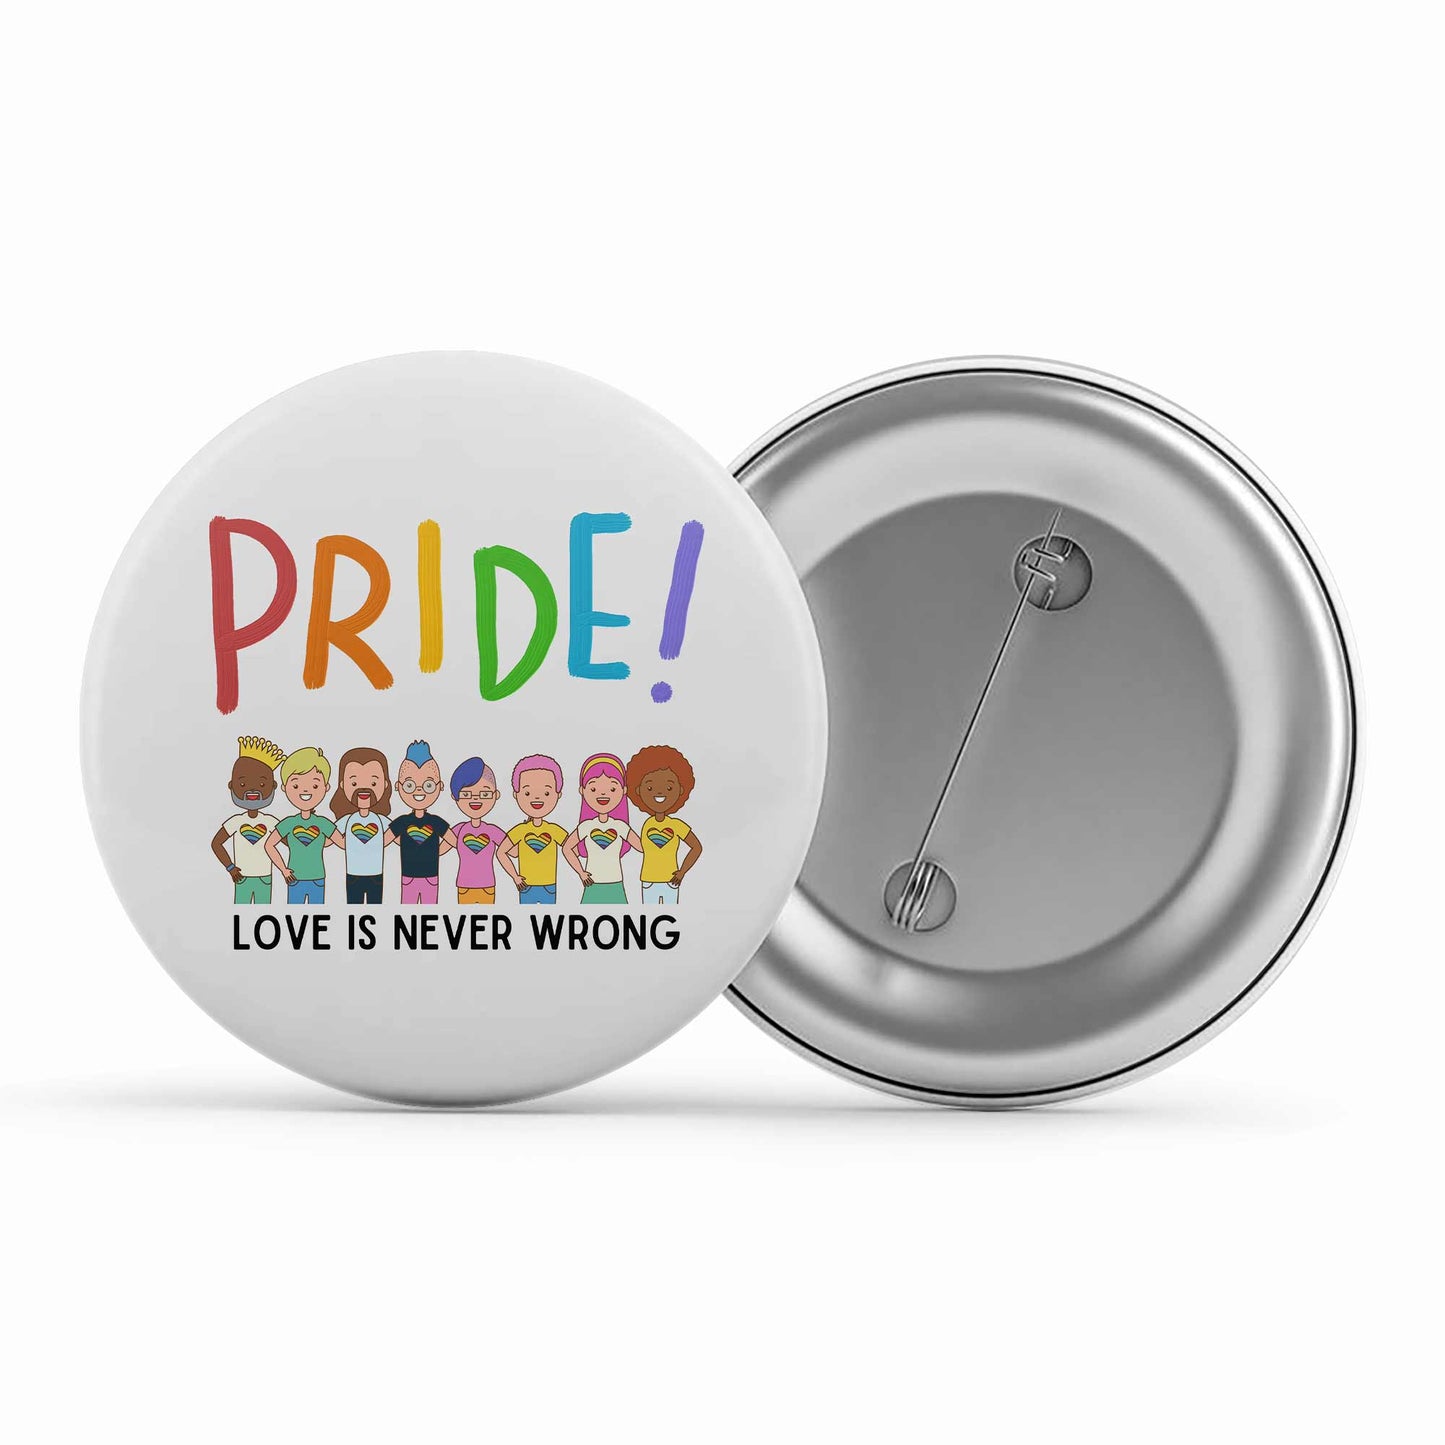 pride love is never wrong badge pin button printed graphic stylish buy online india the banyan tee tbt men women girls boys unisex  - lgbtqia+